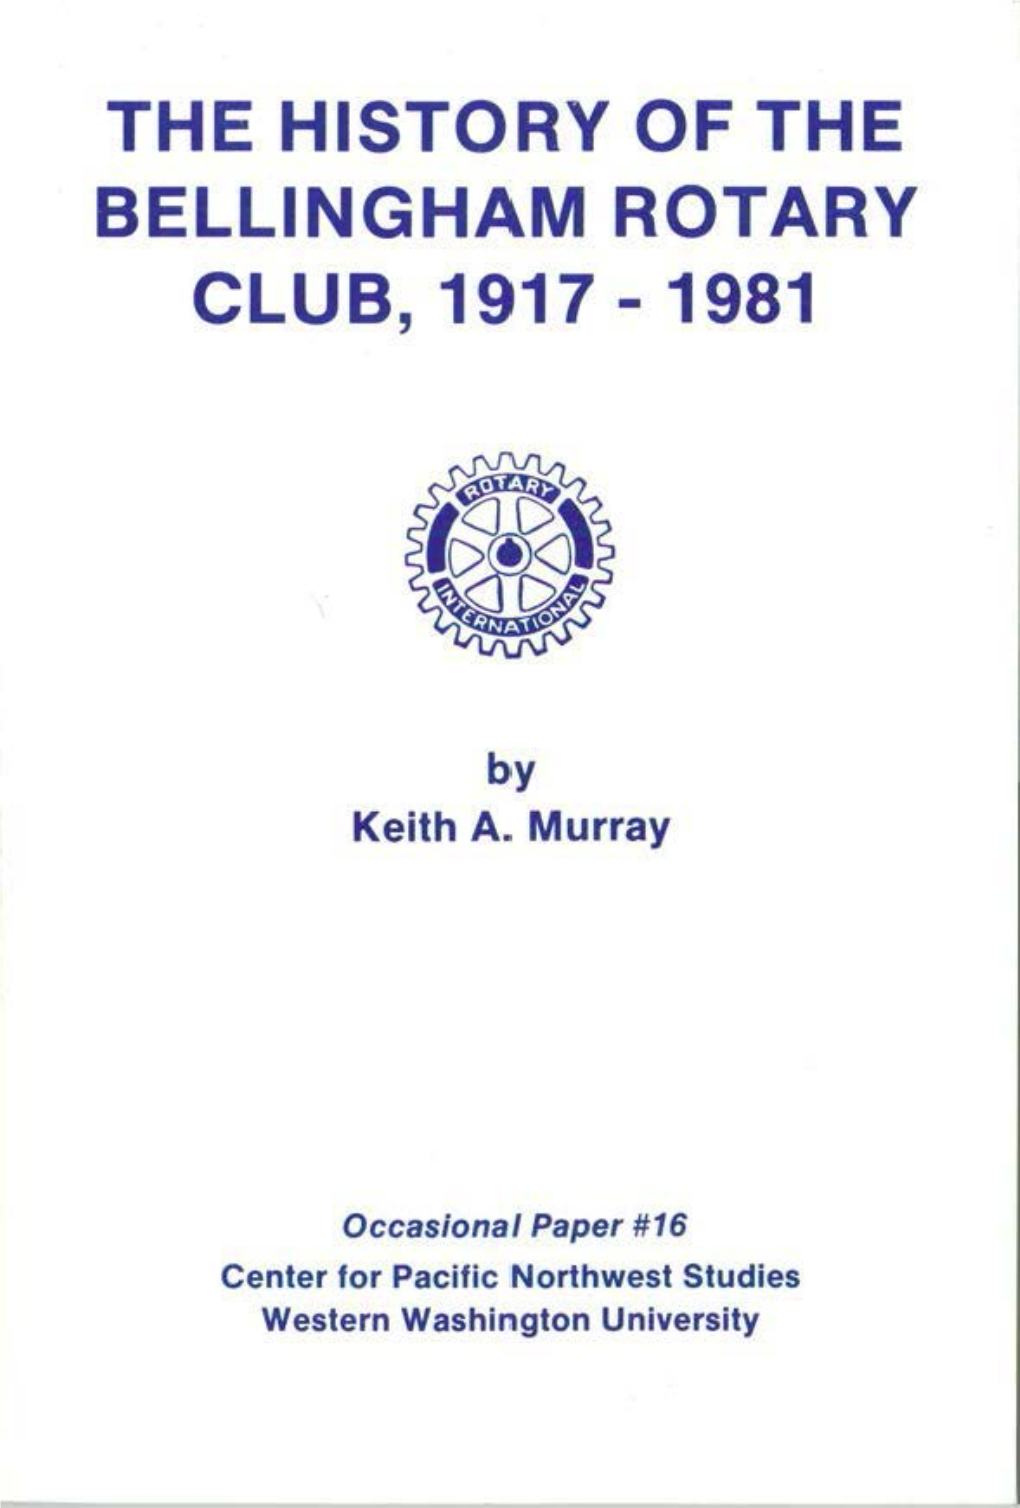 The History of the Bellingham Rotary Club, 1917 - 1981